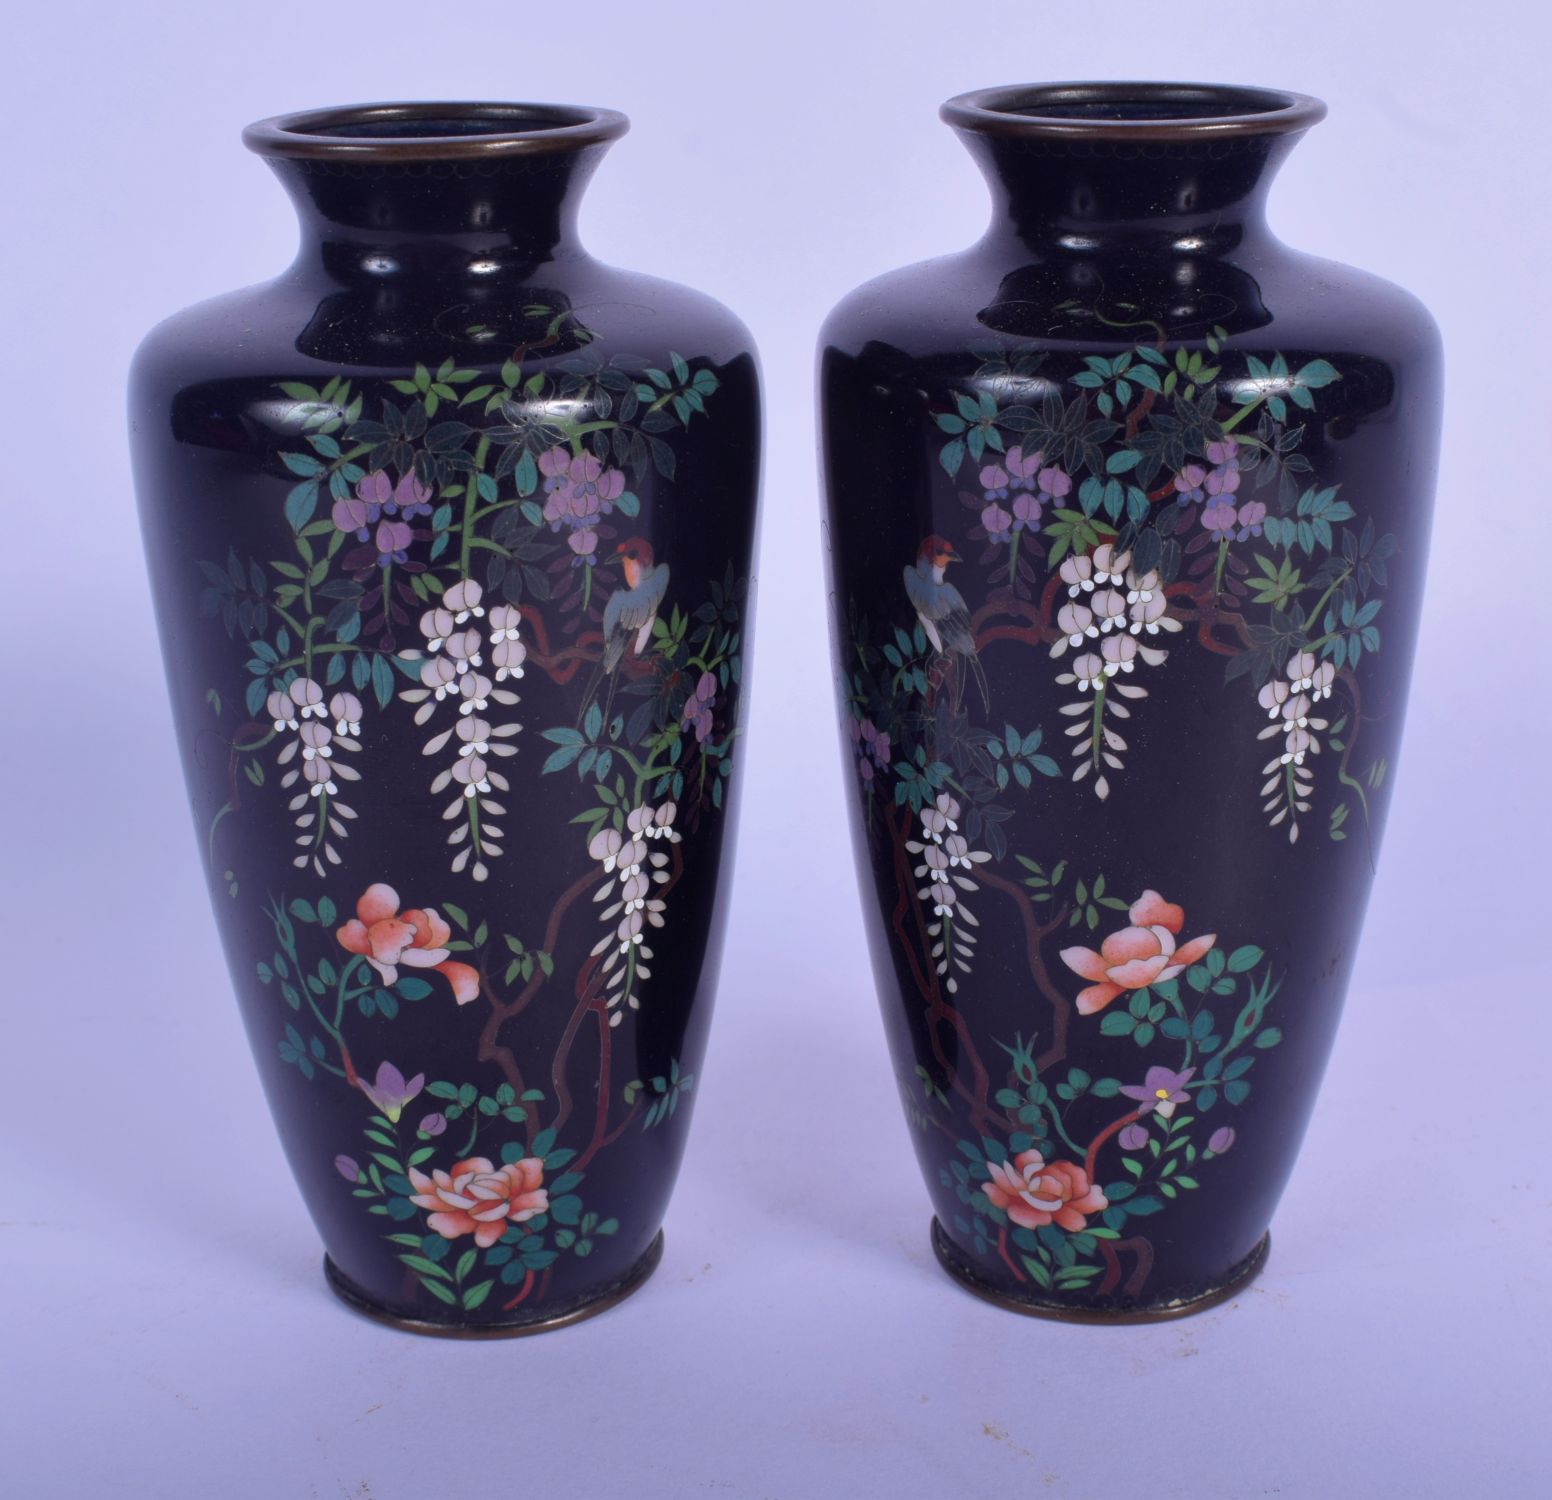 A PAIR OF EARLY 20TH CENTURY JAPANESE MEIJI PERIOD CLOISONNE ENAMEL VASES decorated with foliage. 13